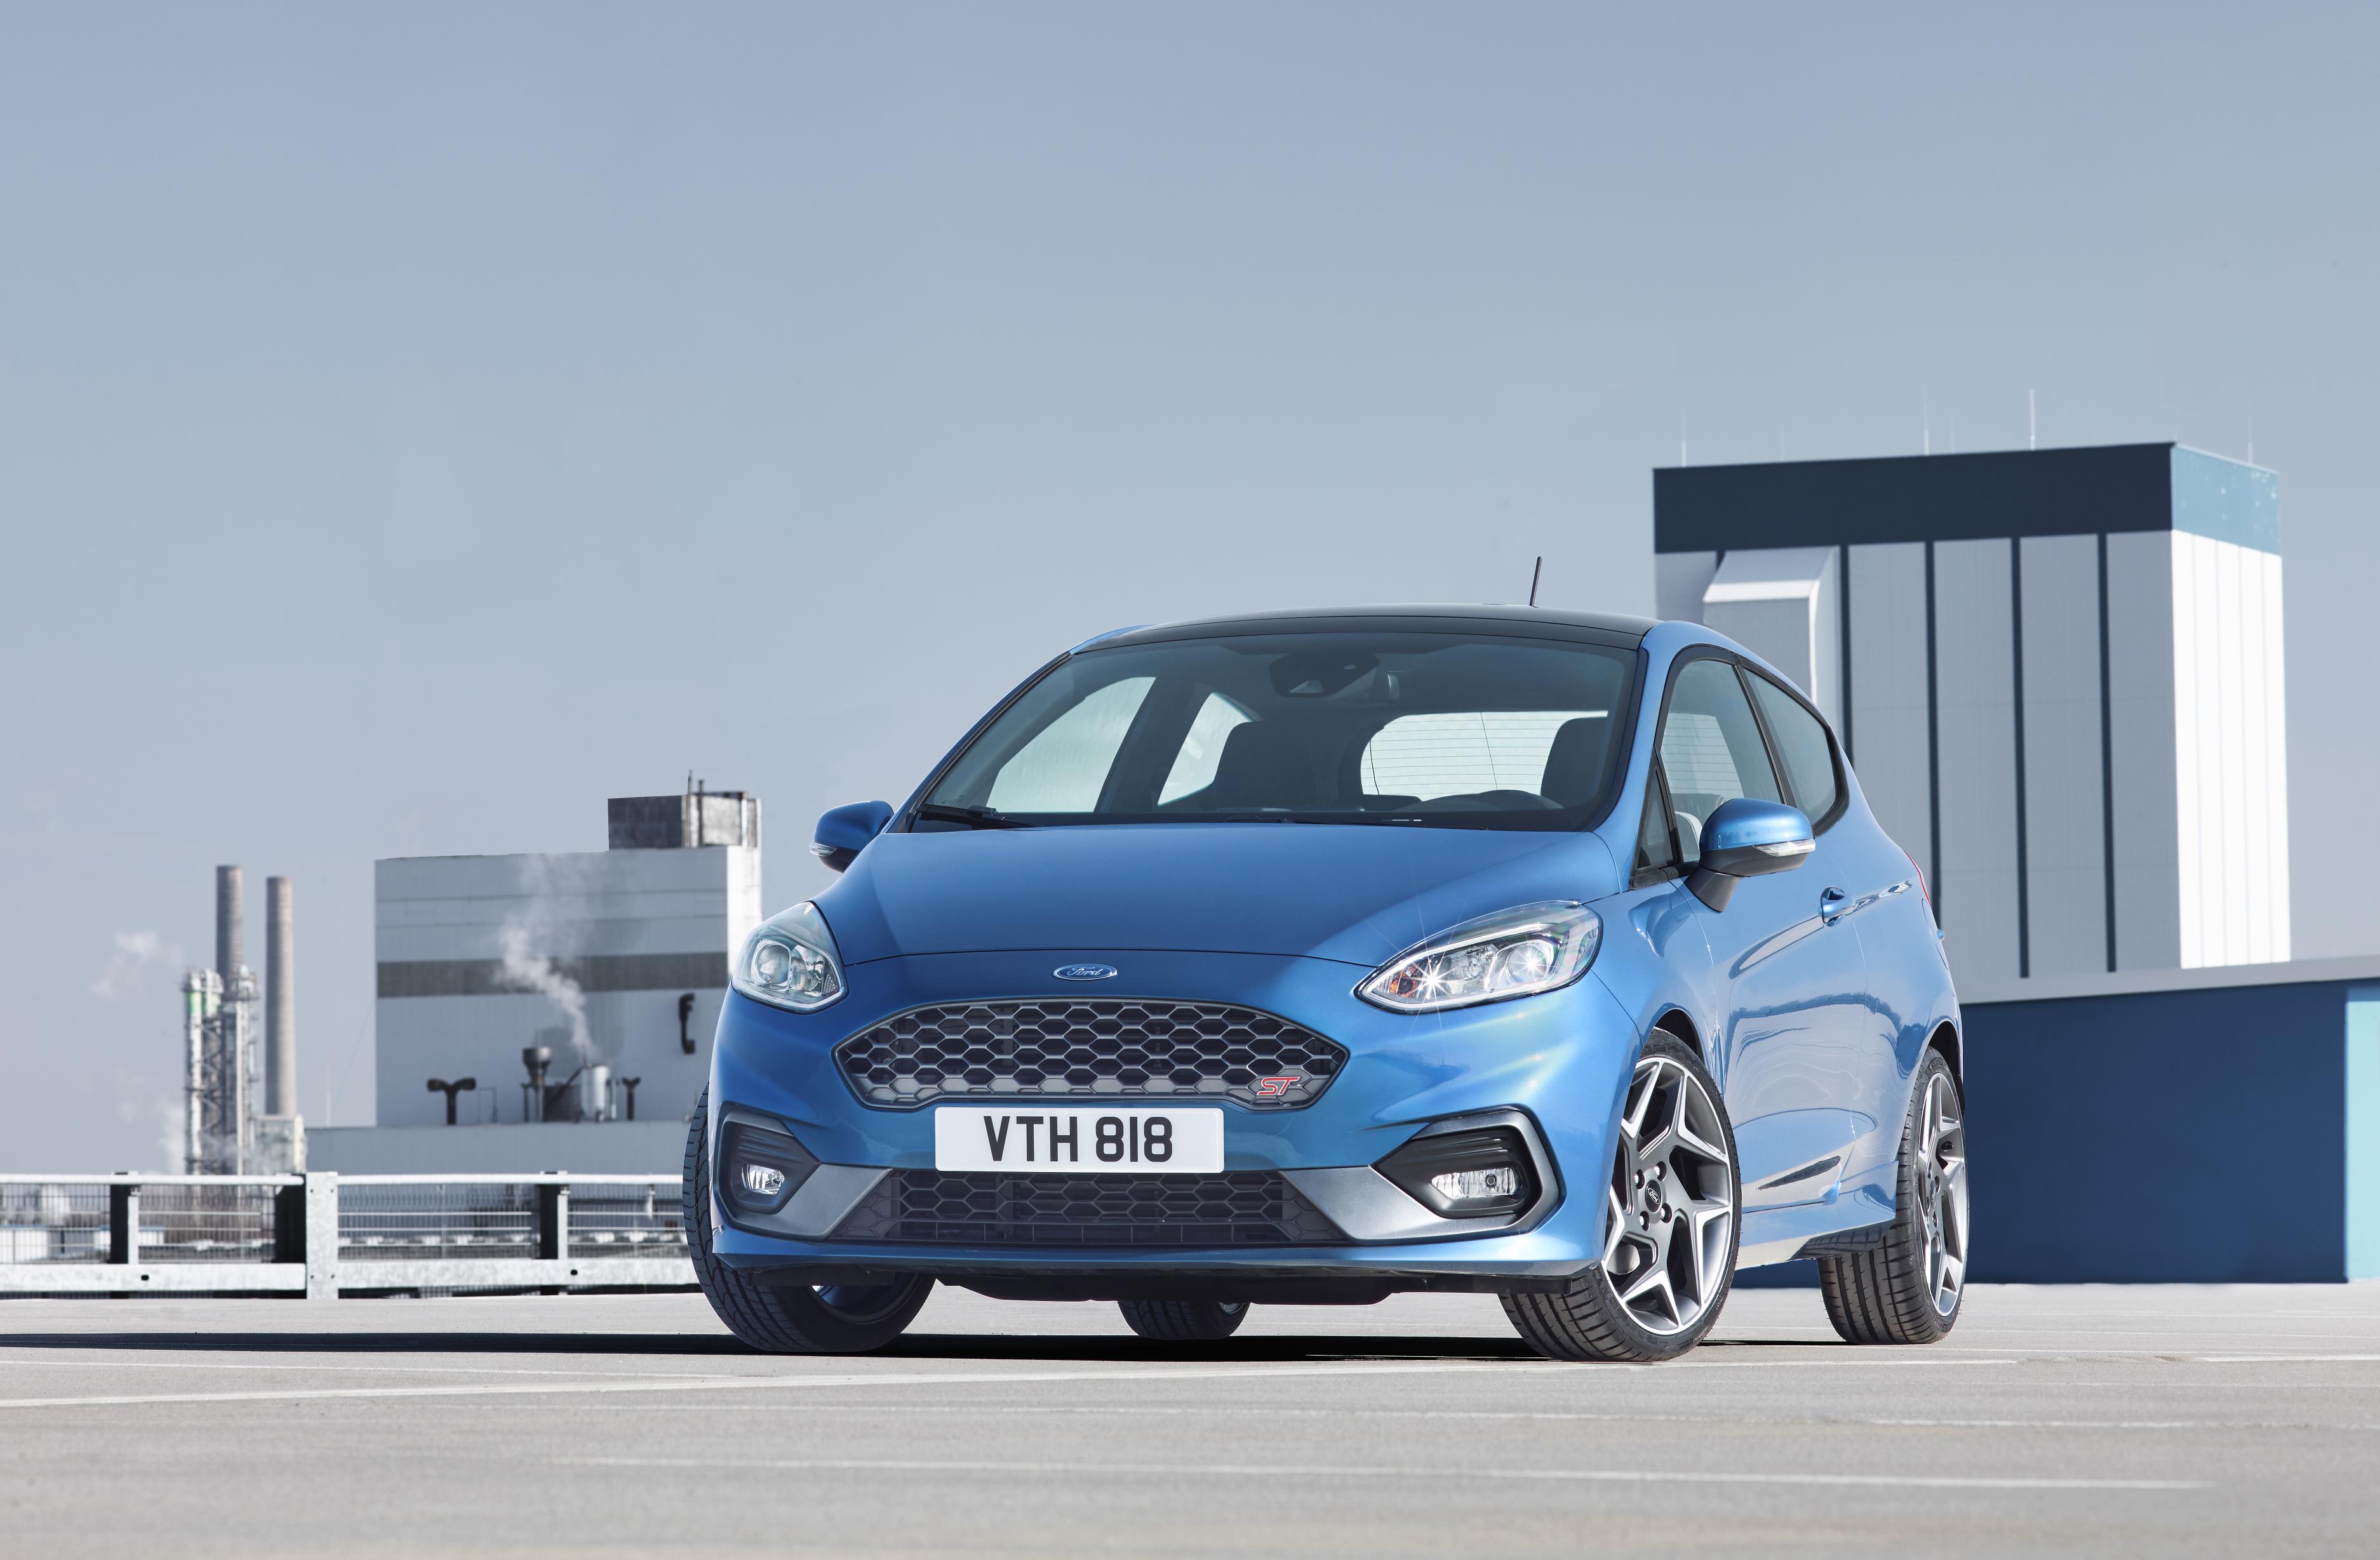 FORD FIESTA ford-fiesta-mk8-st-line occasion - Le Parking